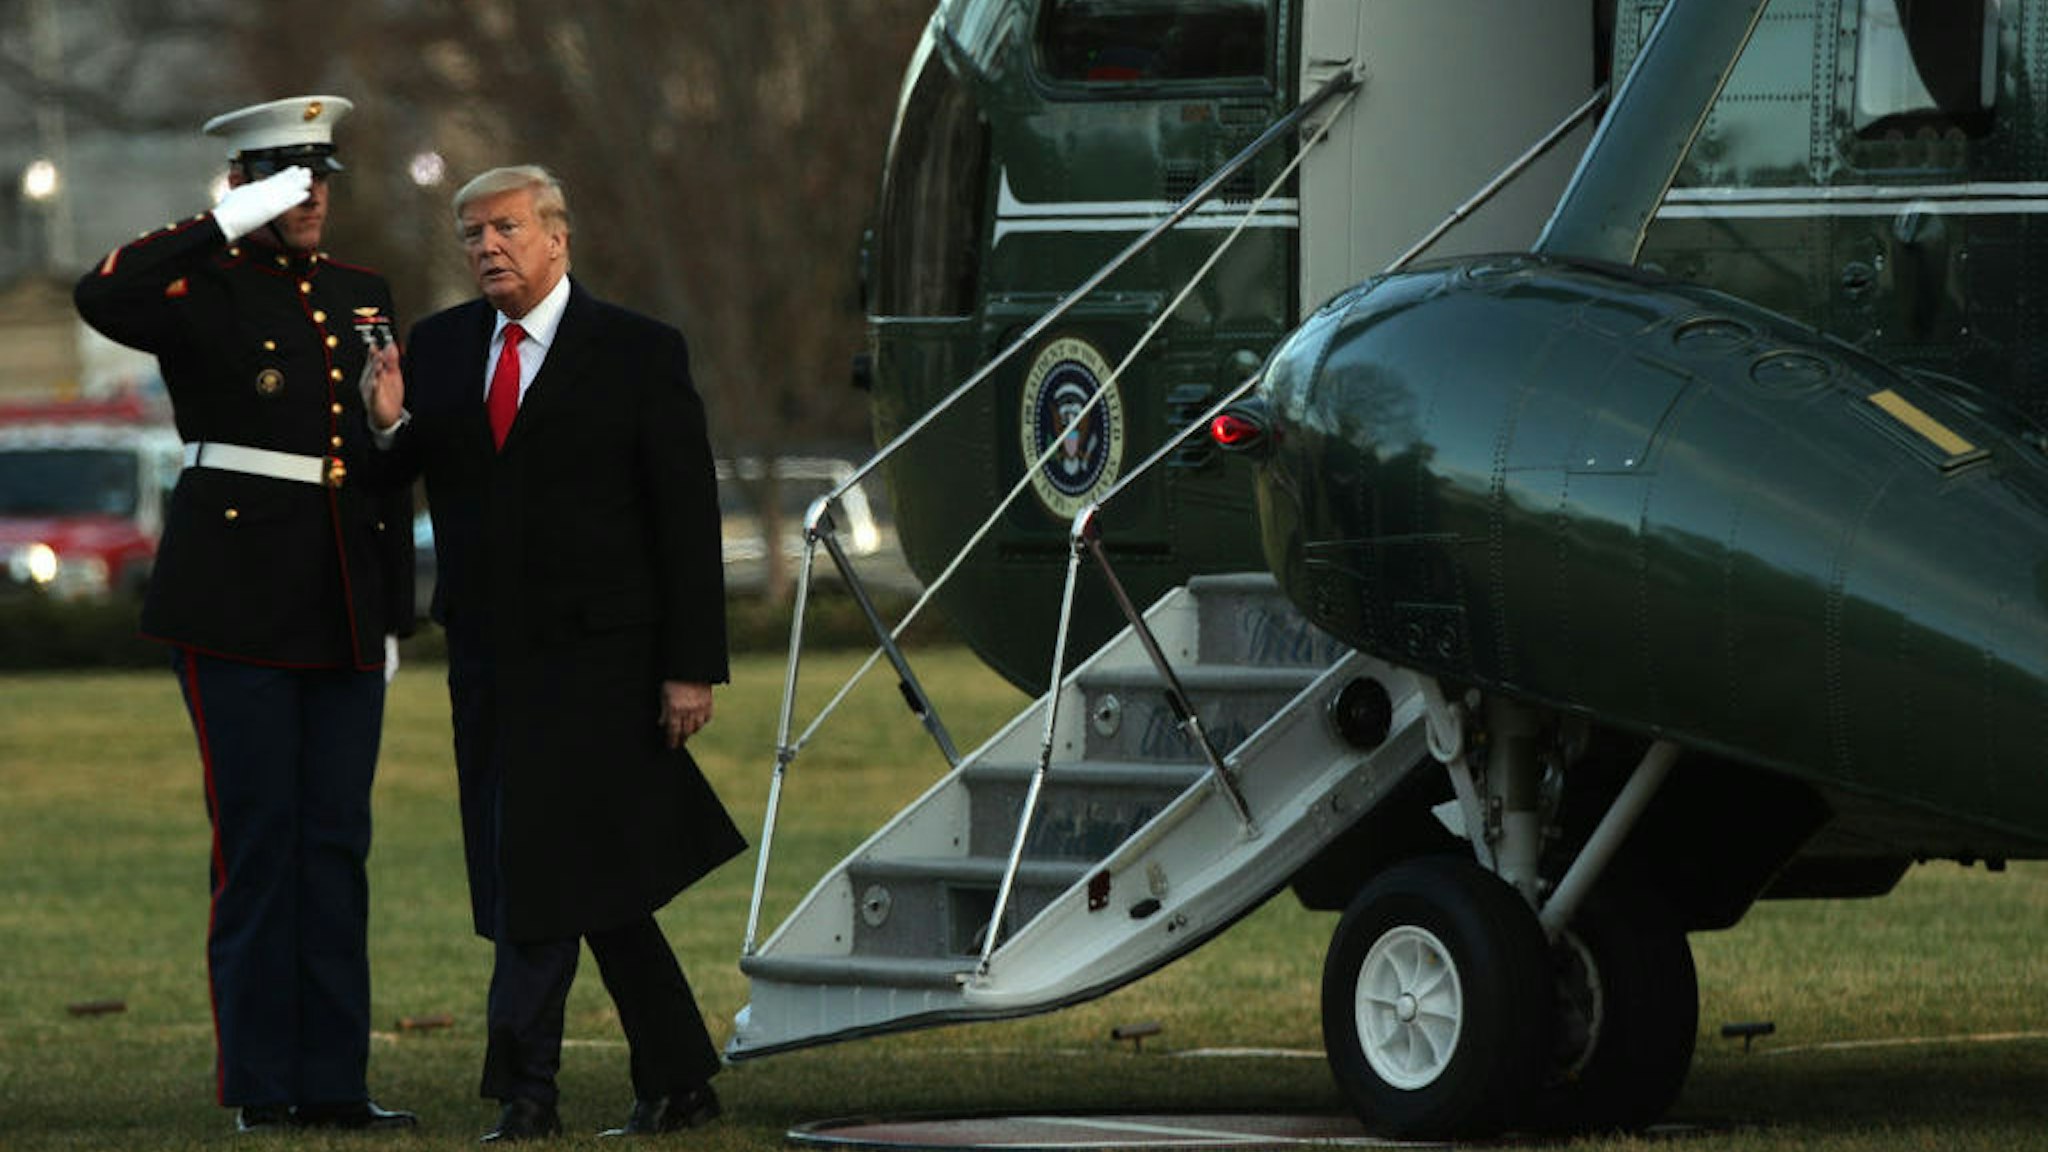 U.S. President Donald Trump gets off from the Marine One after he landed at the South Lawn of the White House February 7, 2020 in Washington, DC. President Trump has returned from speaking at a ‚ÄúNorth Carolina Opportunity Now‚Äù summit in Charlotte, North Carolina. (Photo by Alex Wong/Getty Images)